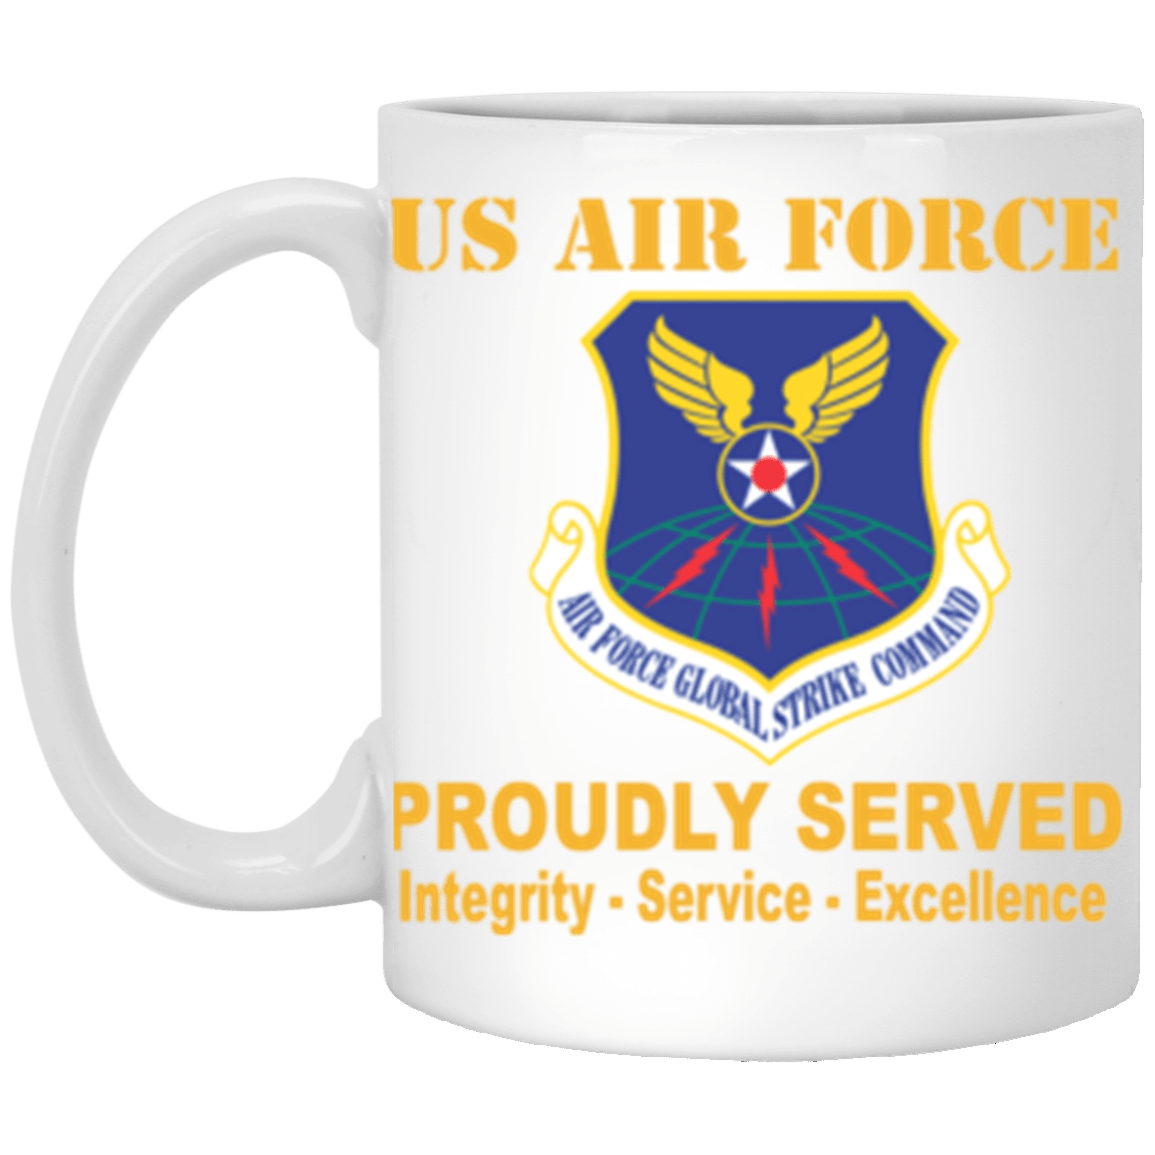 US Air Force Air Force Global Strike Command Proudly Served Core Values 11 oz. White Mug-Drinkware-Veterans Nation